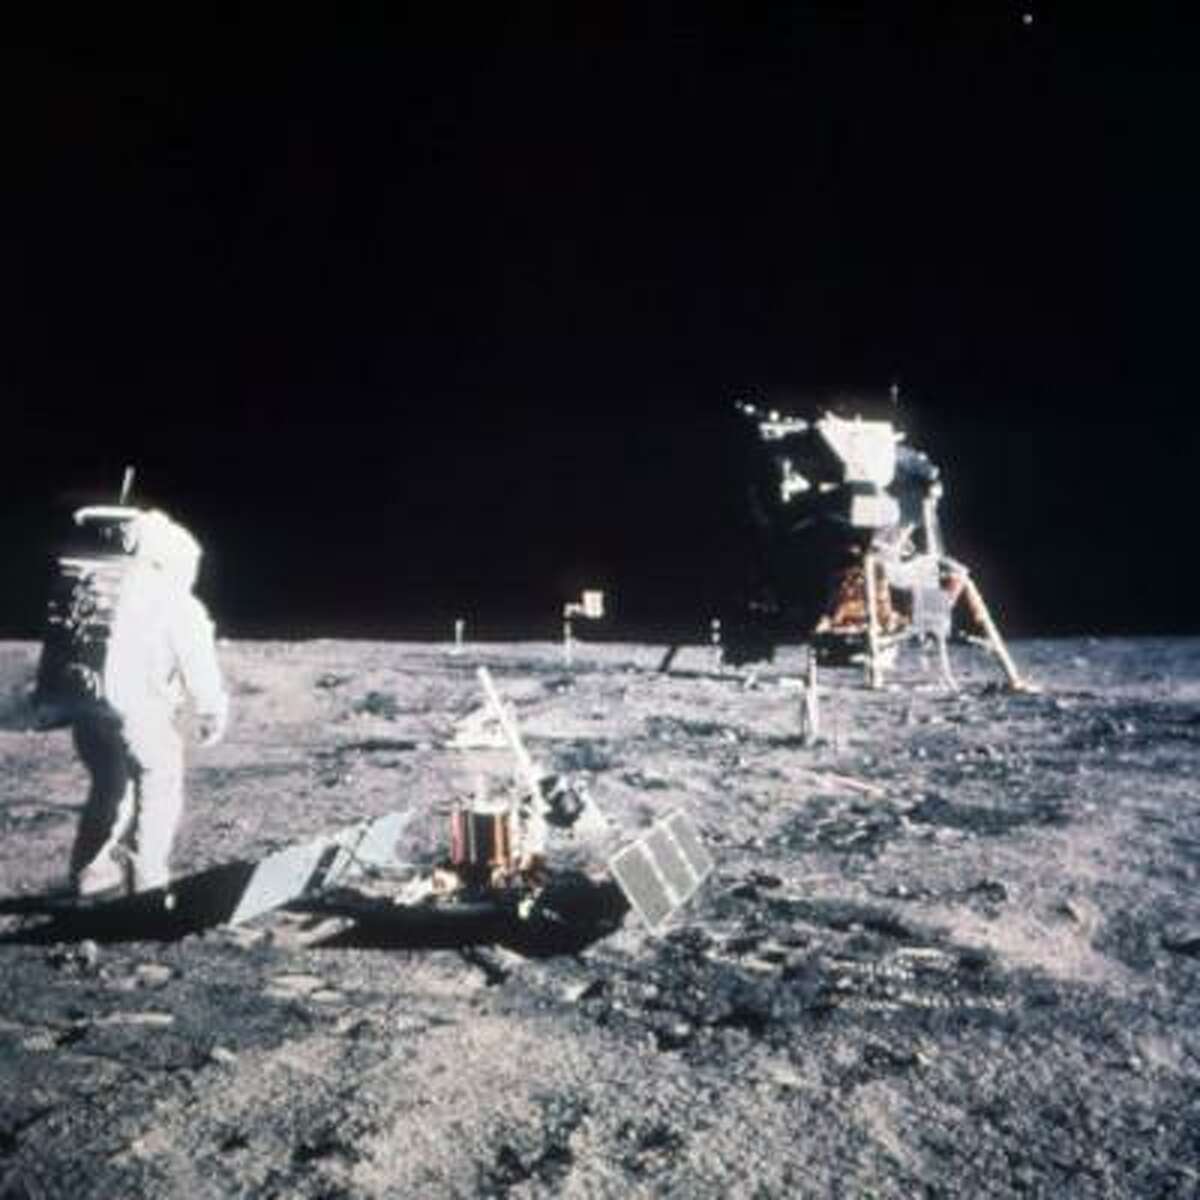 Astronaut Edwin E. Aldrin Jr., lunar module pilot, stands on the lunar surface after the Apollo 11 moon landing on July 20, 1969. The Lunar Module is seen in the background.